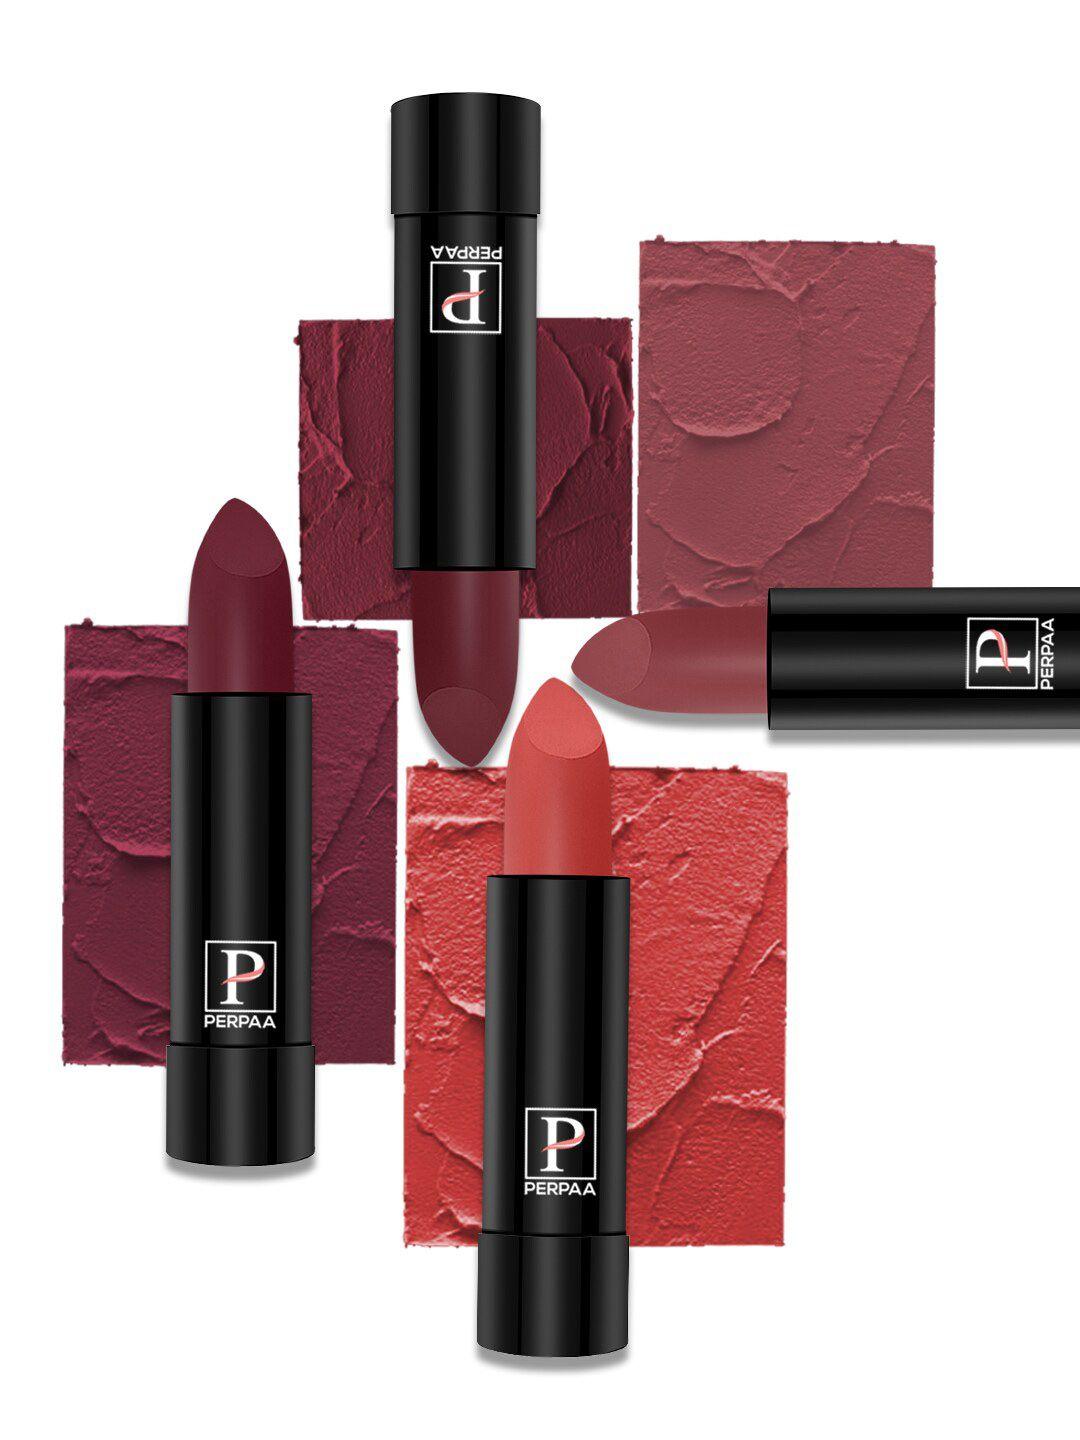 perpaa set of 4 creamy matte long lasting lipstick with beeswax- shades 93 + 95 + 96 + 110